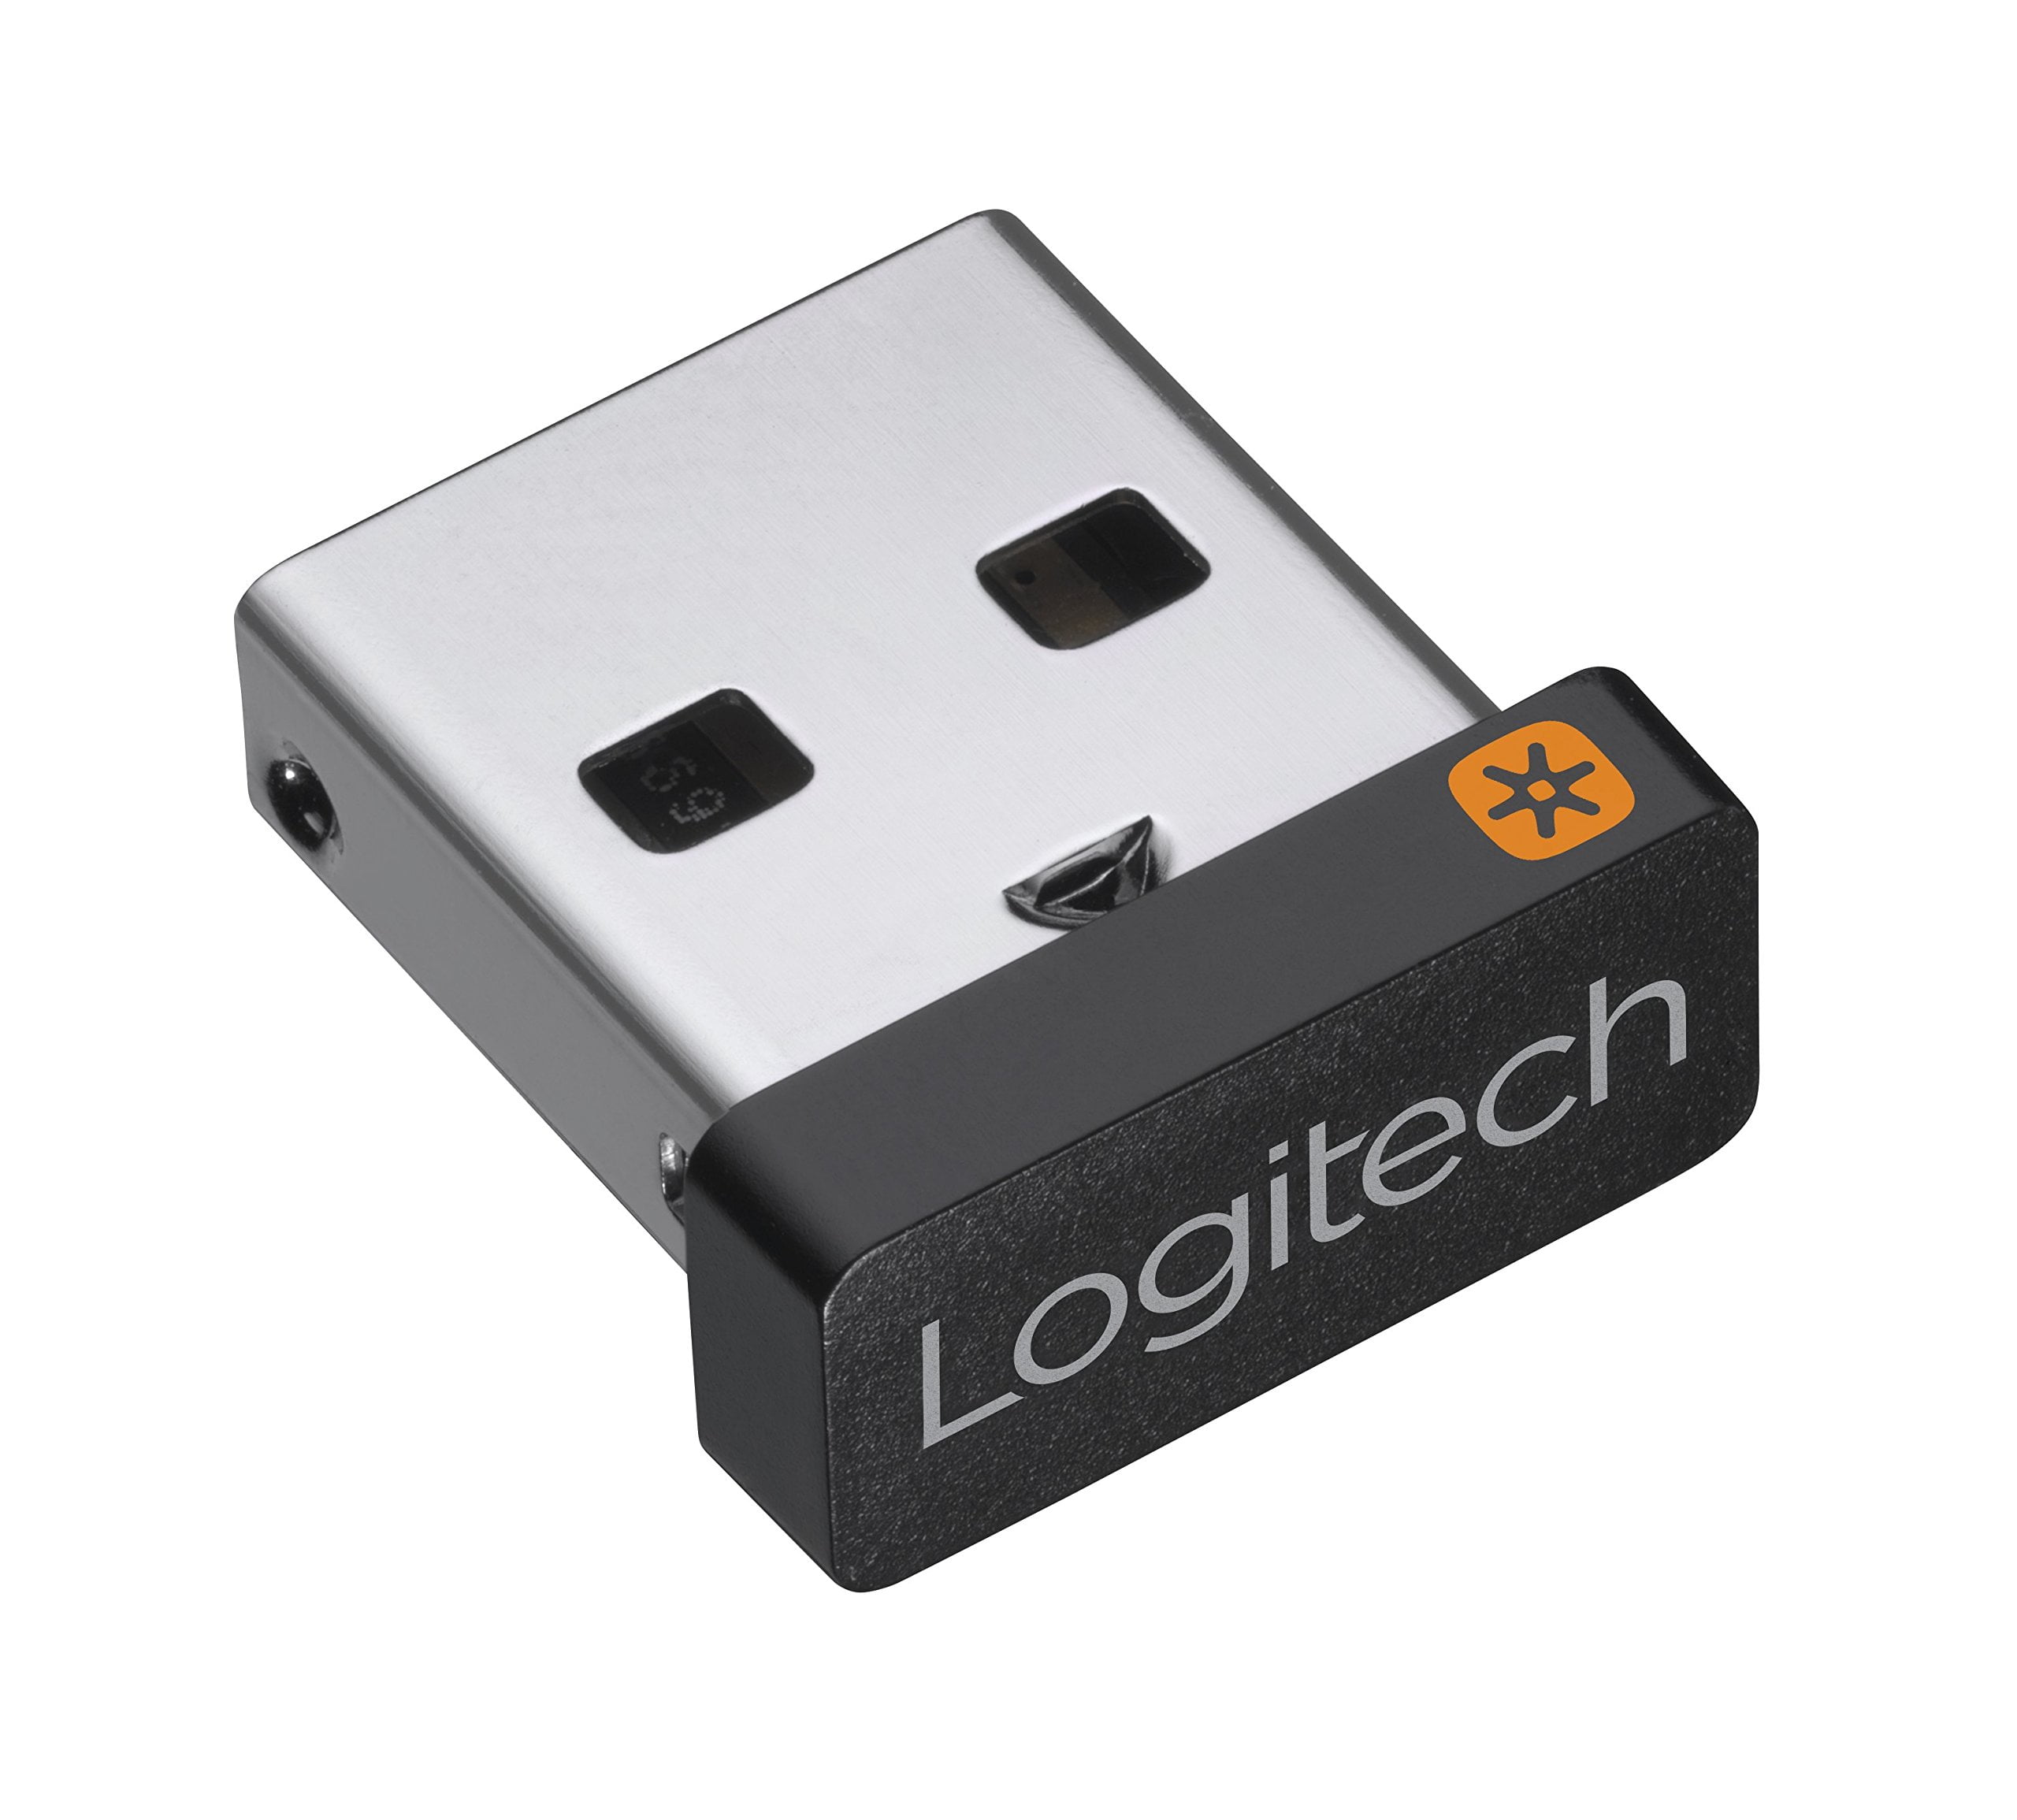 Replacement Unifying Receiver for Logitech Wireless Keyboard K340 HS 